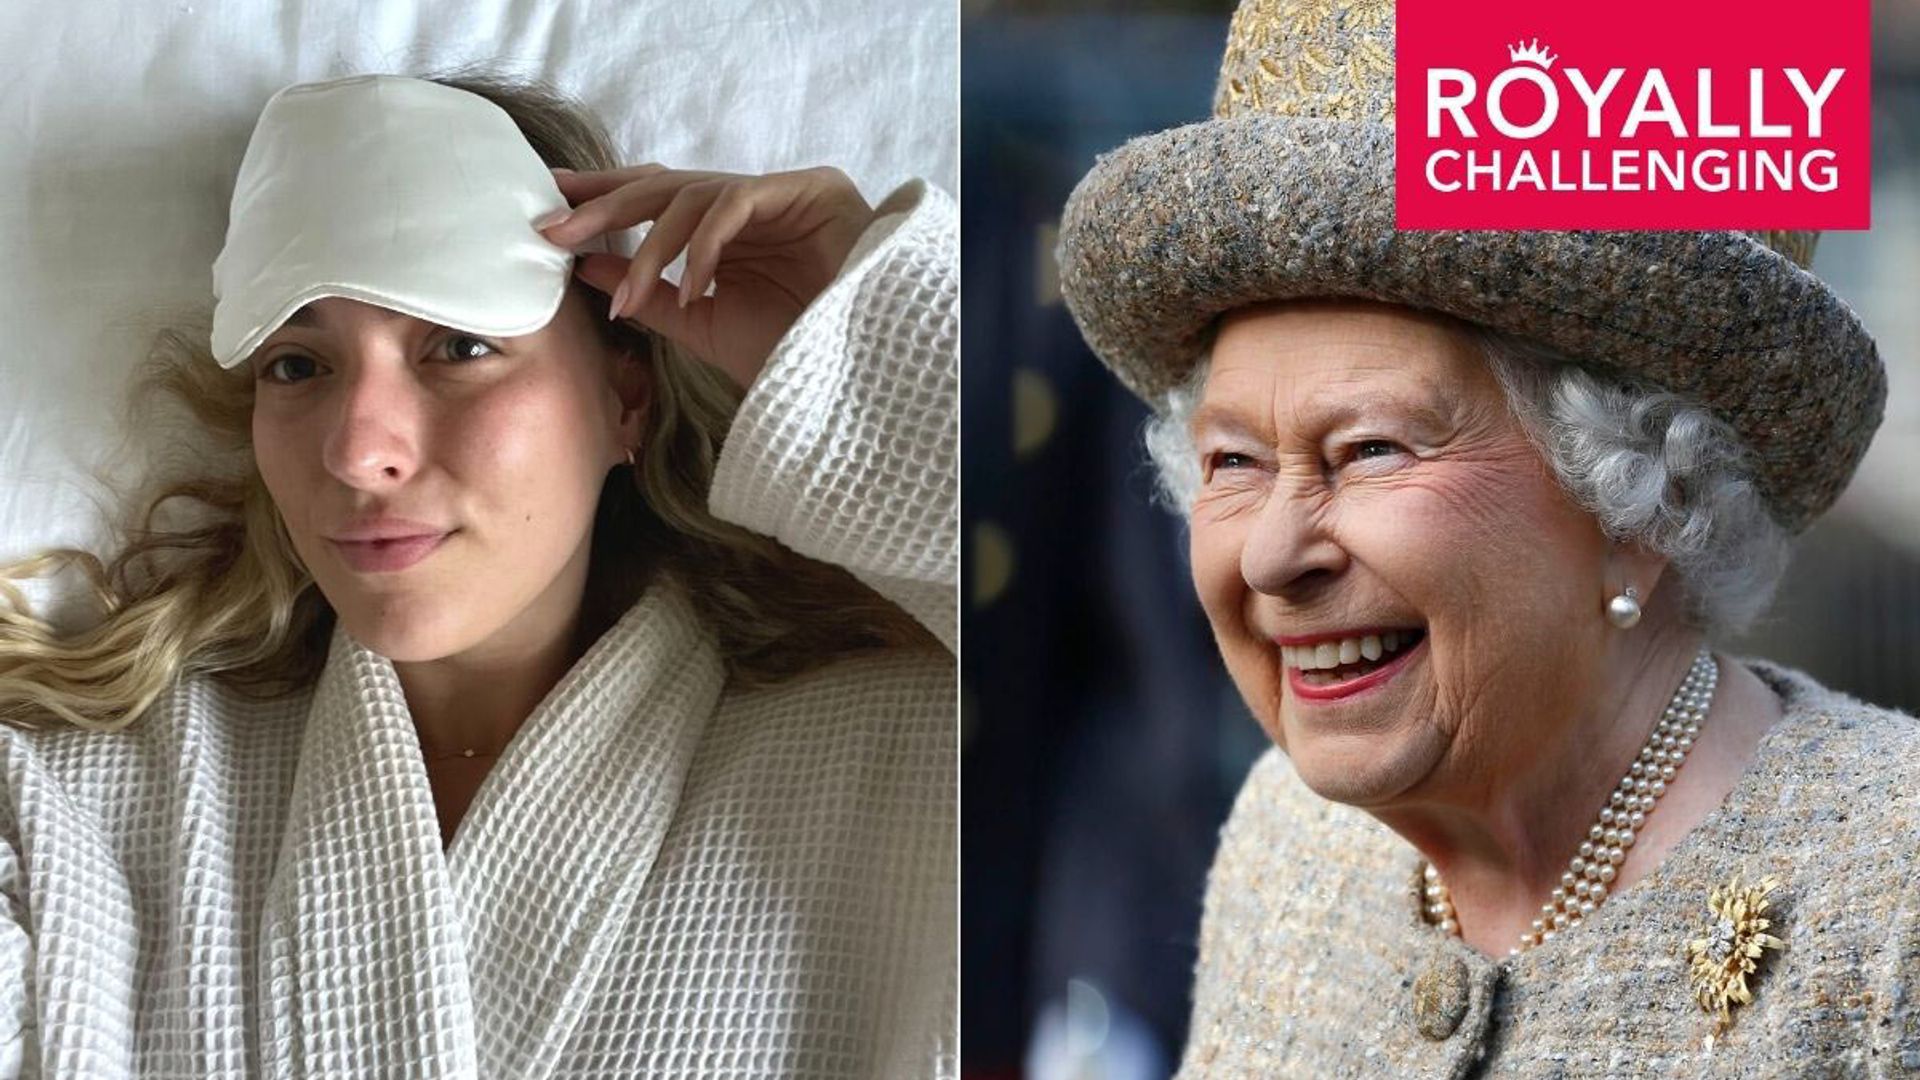 I tried the Queen's sleep routine for a week - and this is what happened